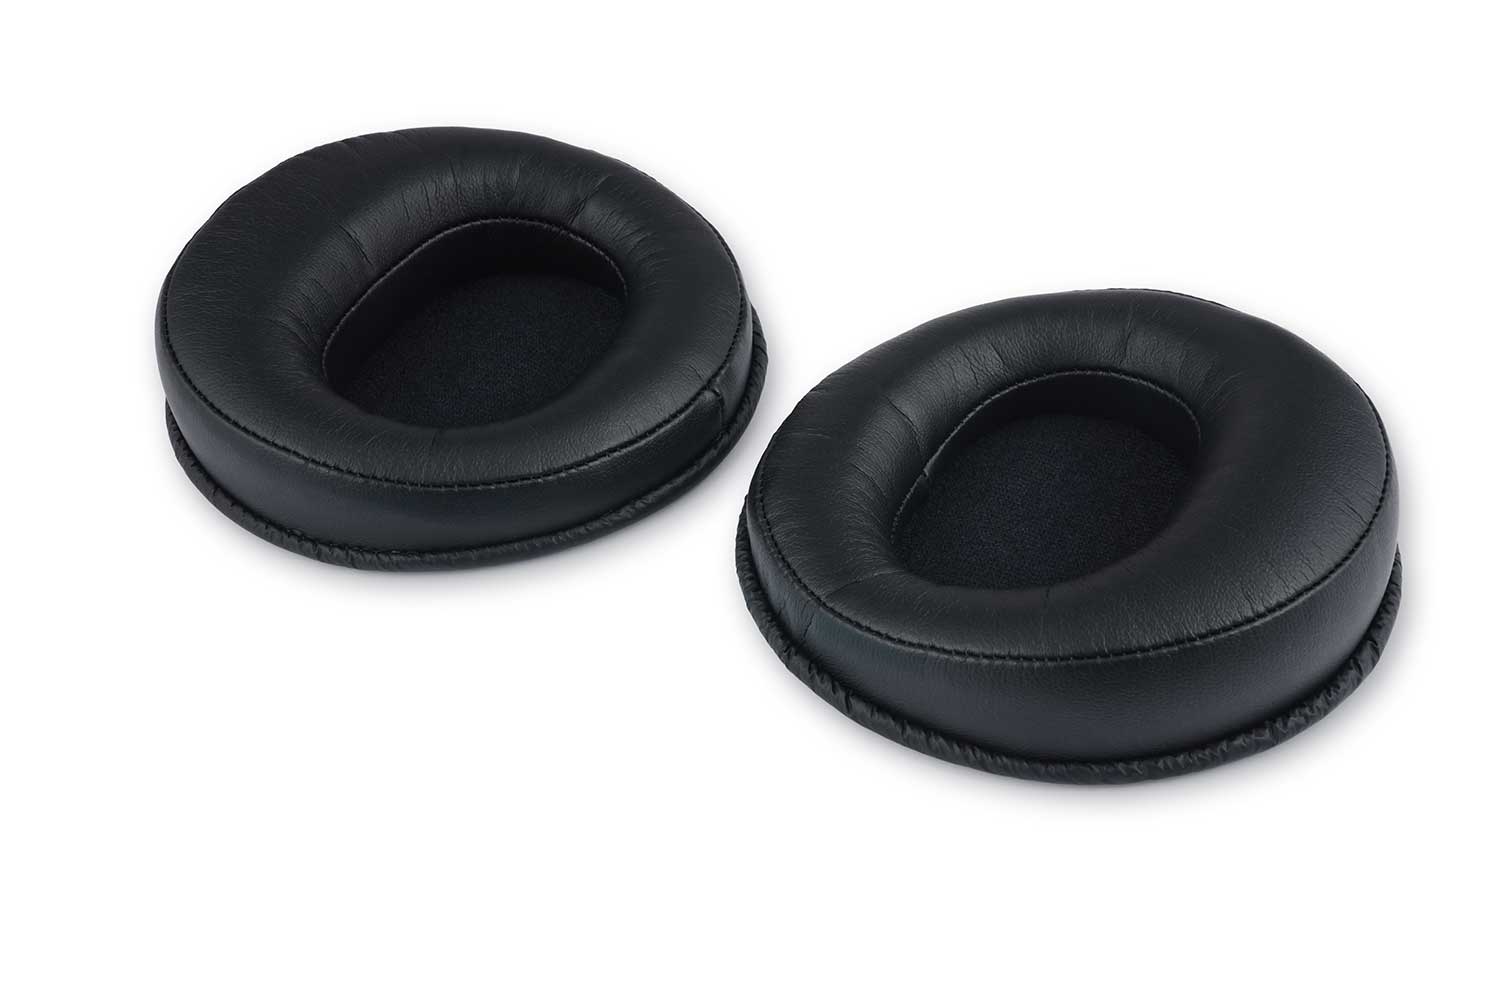 Fostex TH headphone replacement pads